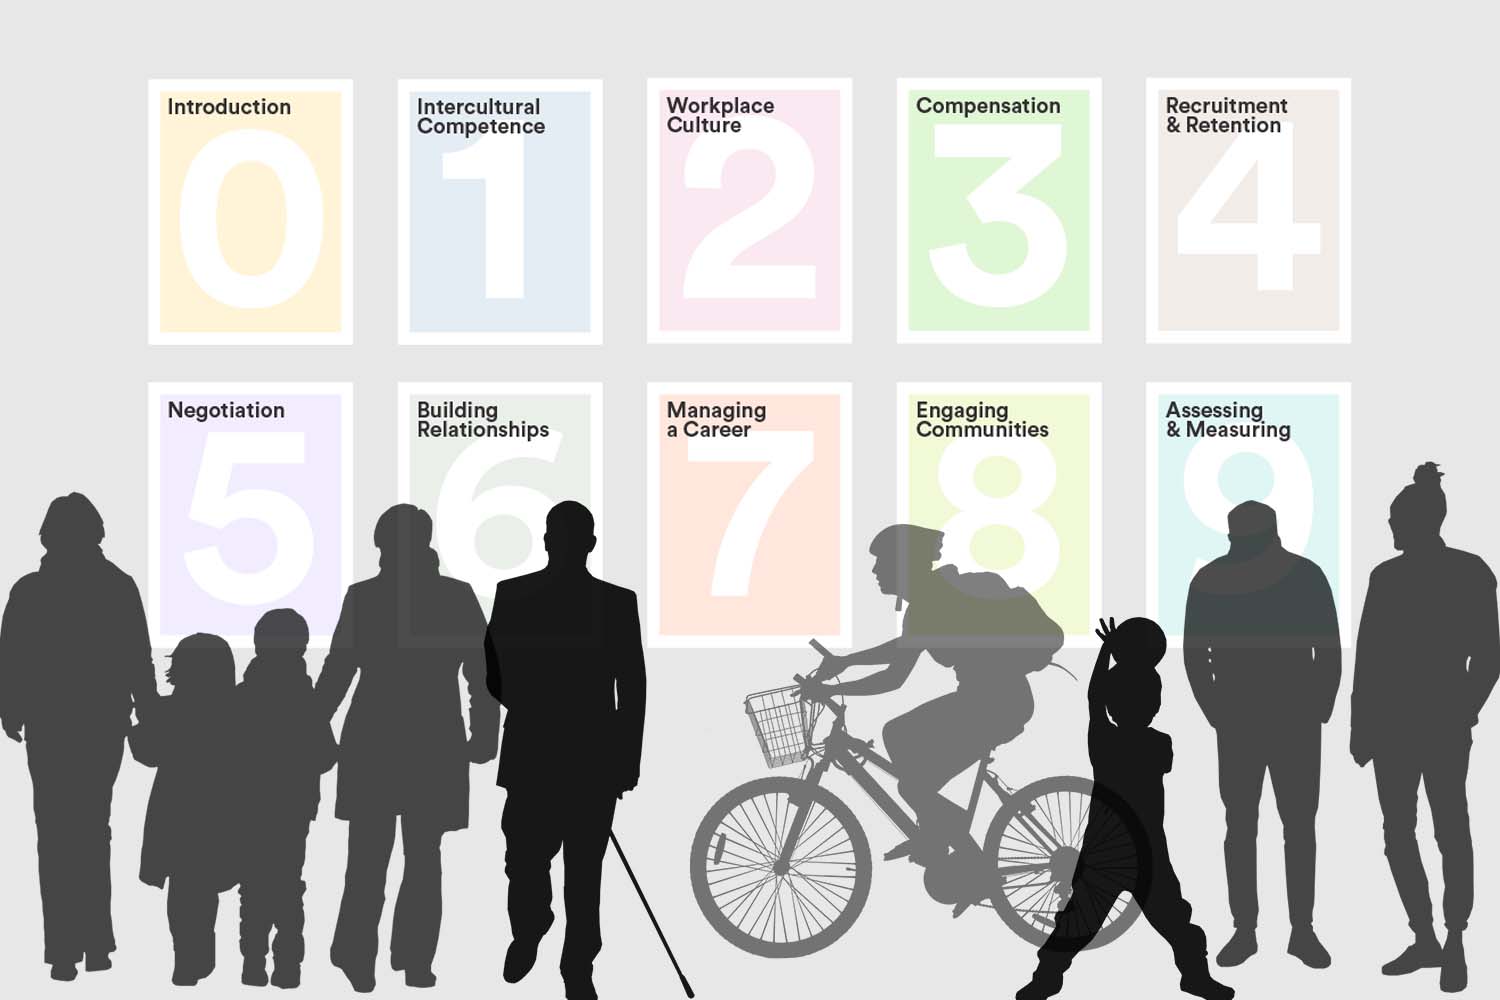 Covers of the Guides to Equitable Practice with silhouettes of a variety of people.